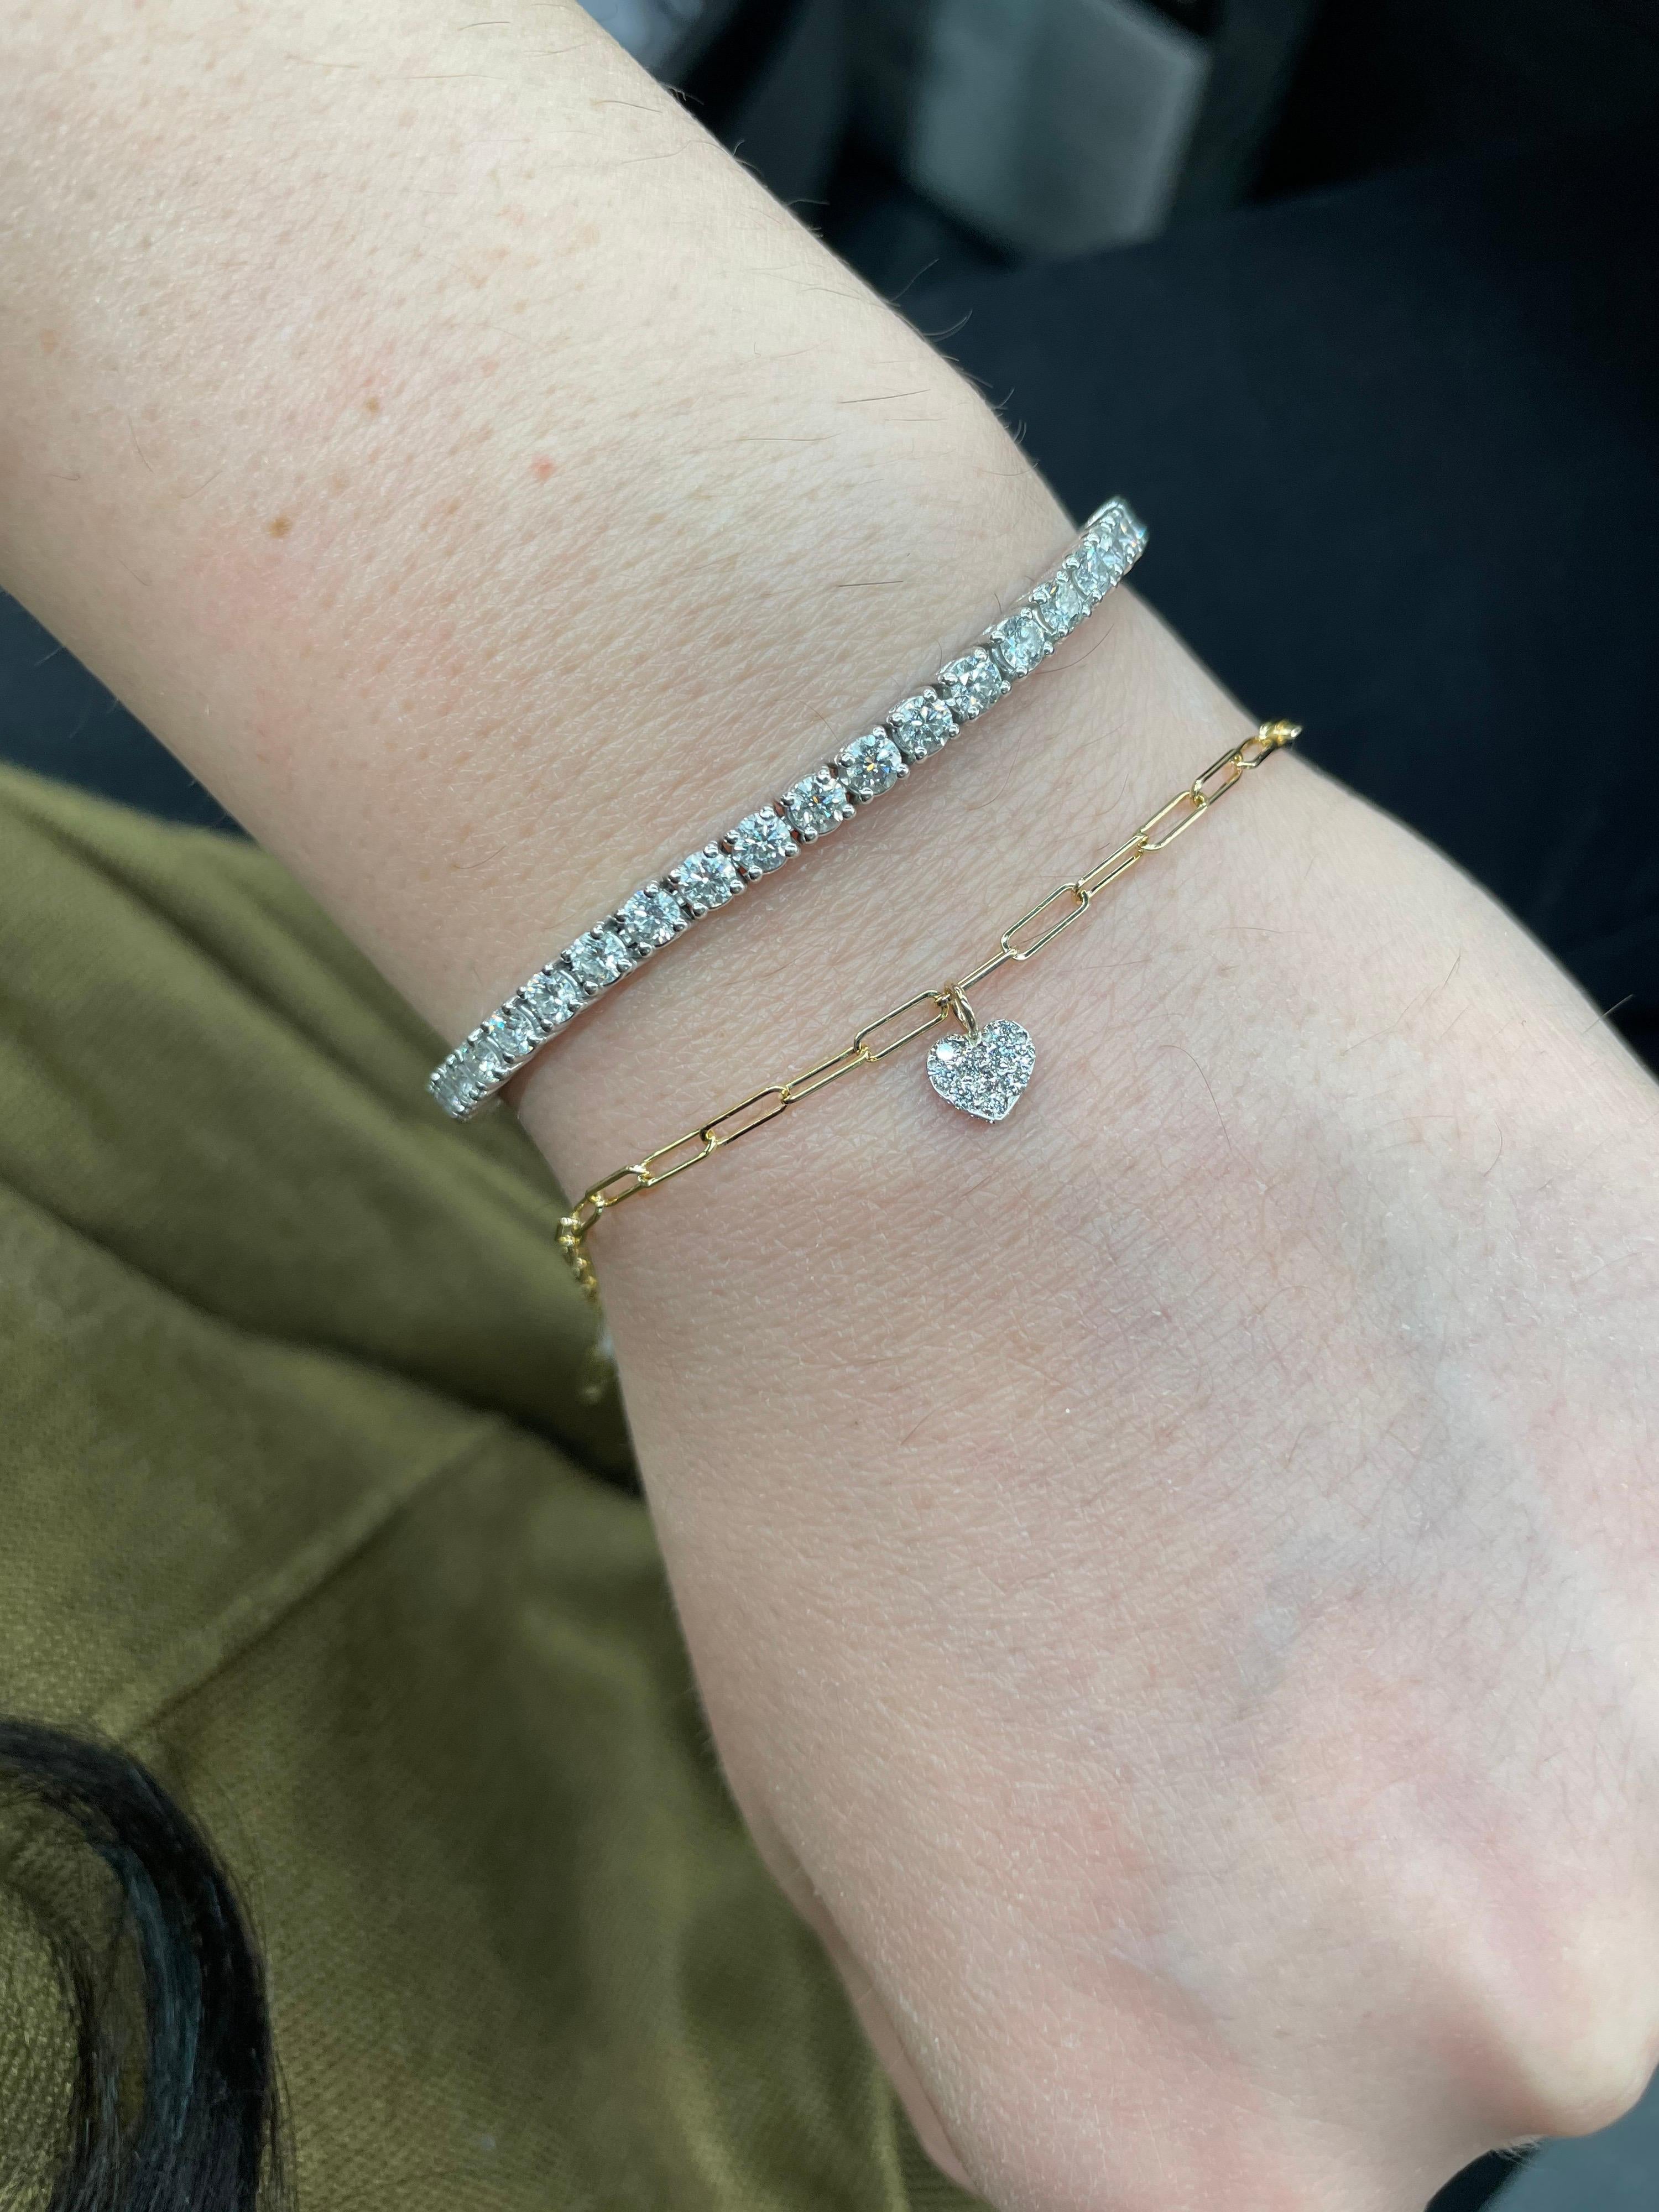 14 Karat yellow gold paperlink bracelet featuring one diamond heart charm containing 5 round brilliants weighing 0.26 carats.
Color G-H
Clarity SI

Bracelet: 7.25 Inches
Heart: 0.25 Inches